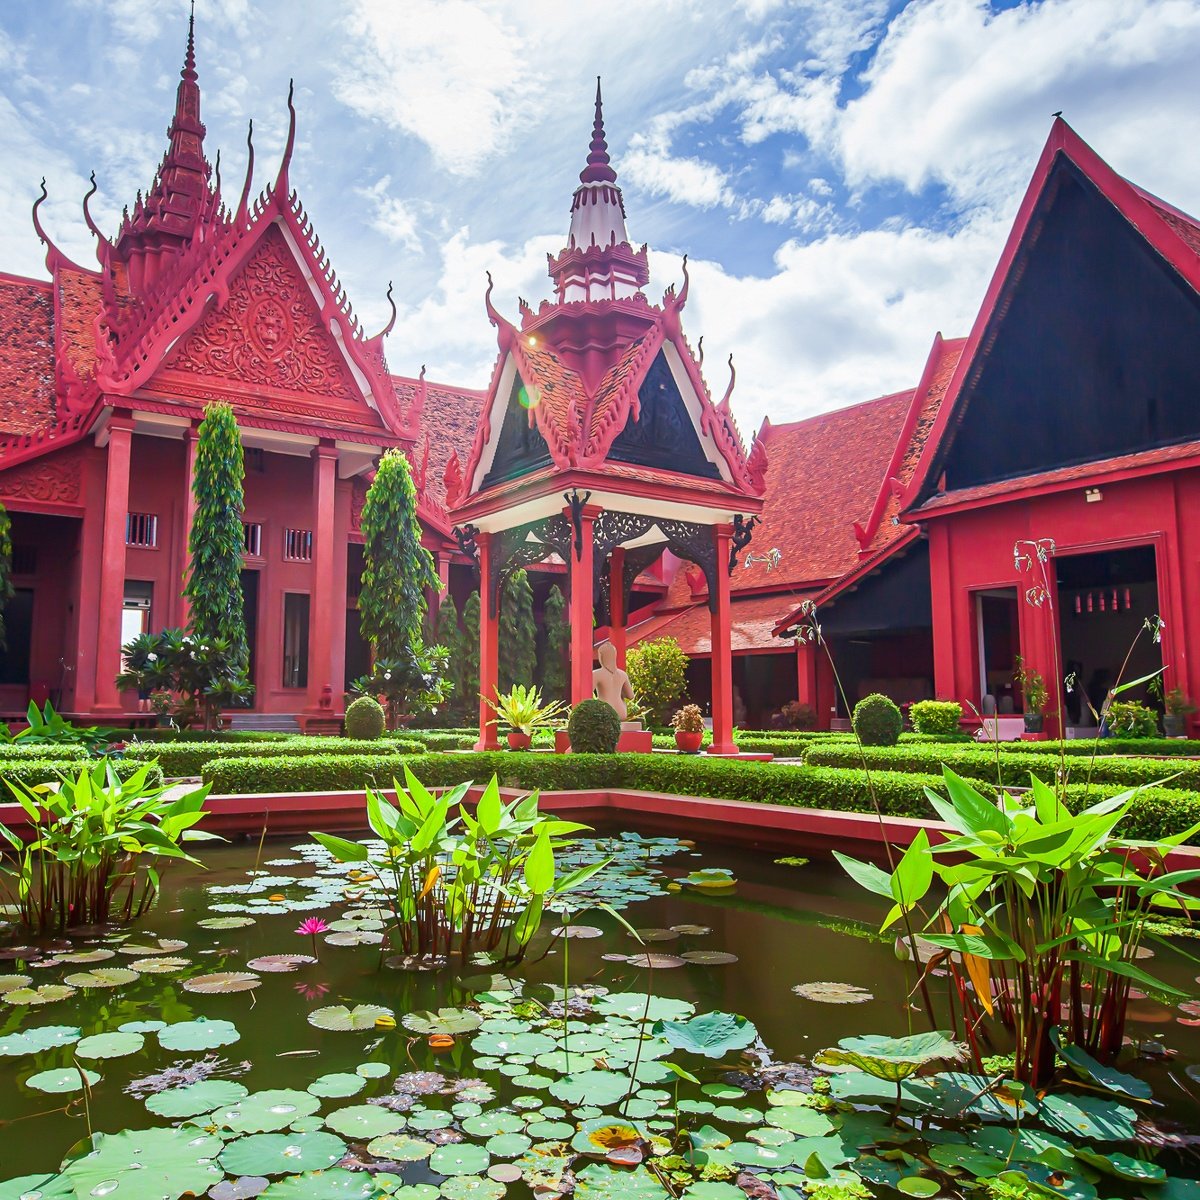 10 Things to Do in Cambodia’s Phnom Penh with Kids